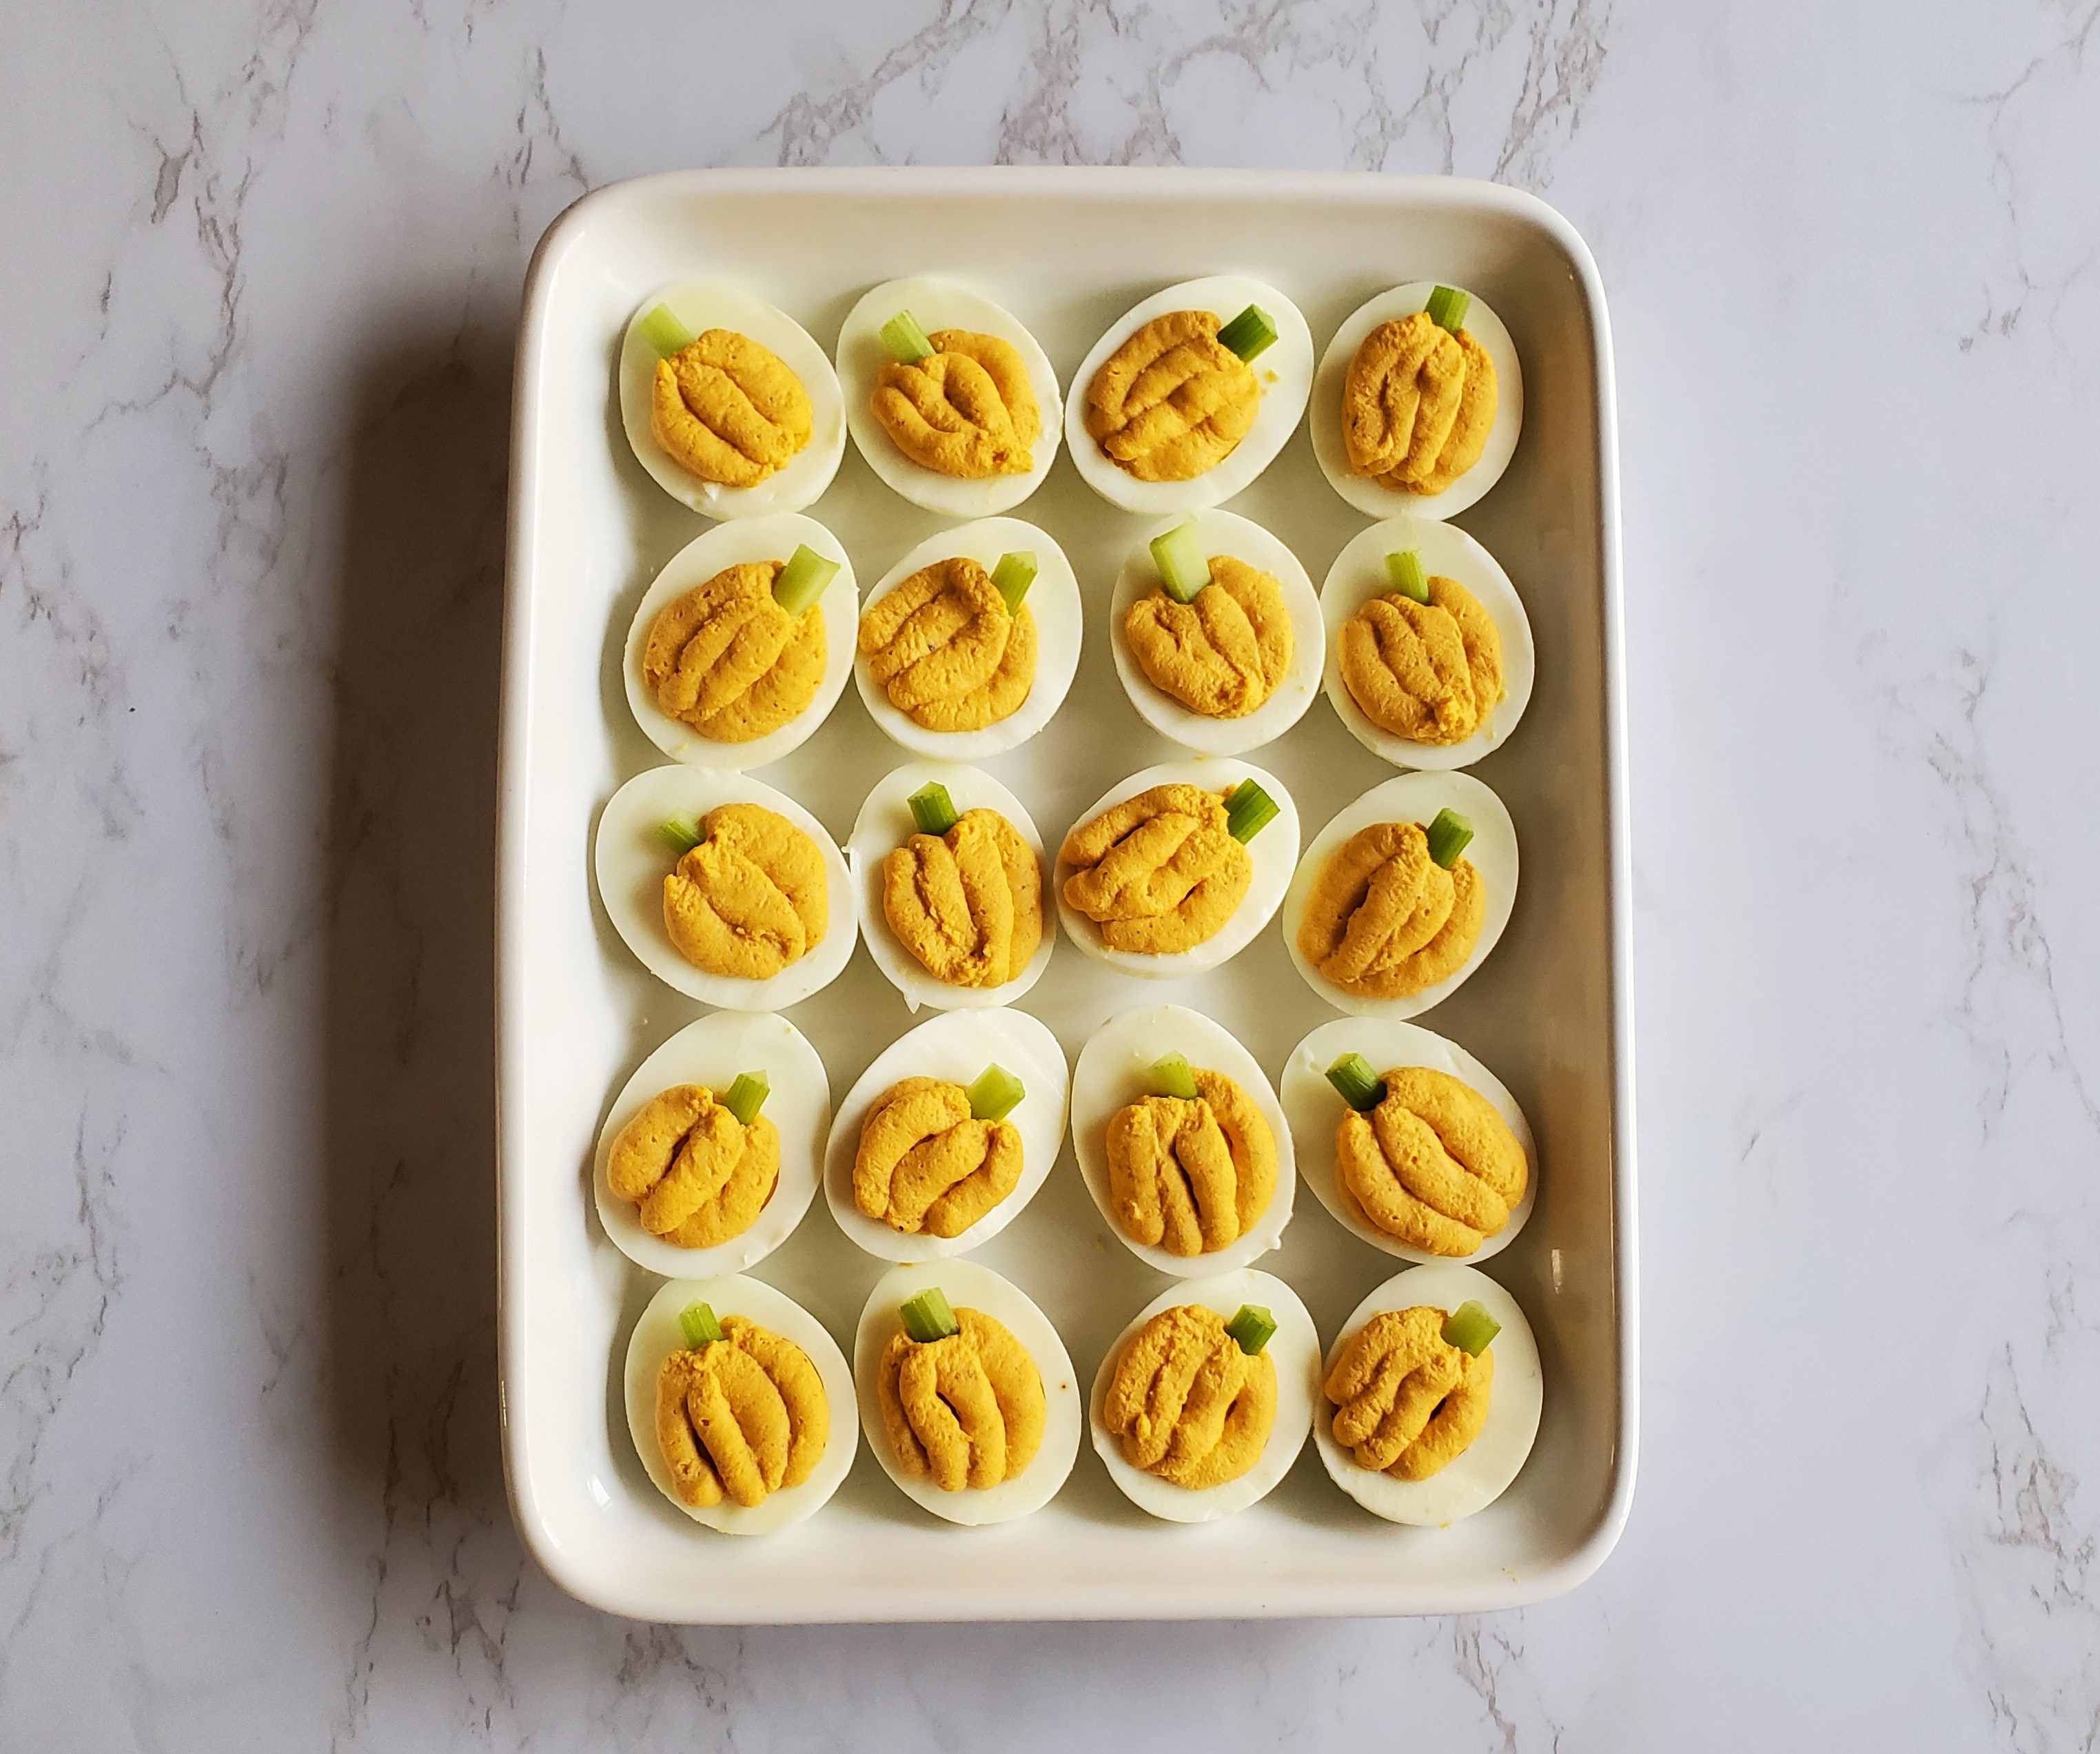 A white rectangular platter of devilled eggs, made to look like pumpkins (with celery stems), sits on top of a white marble countertop.